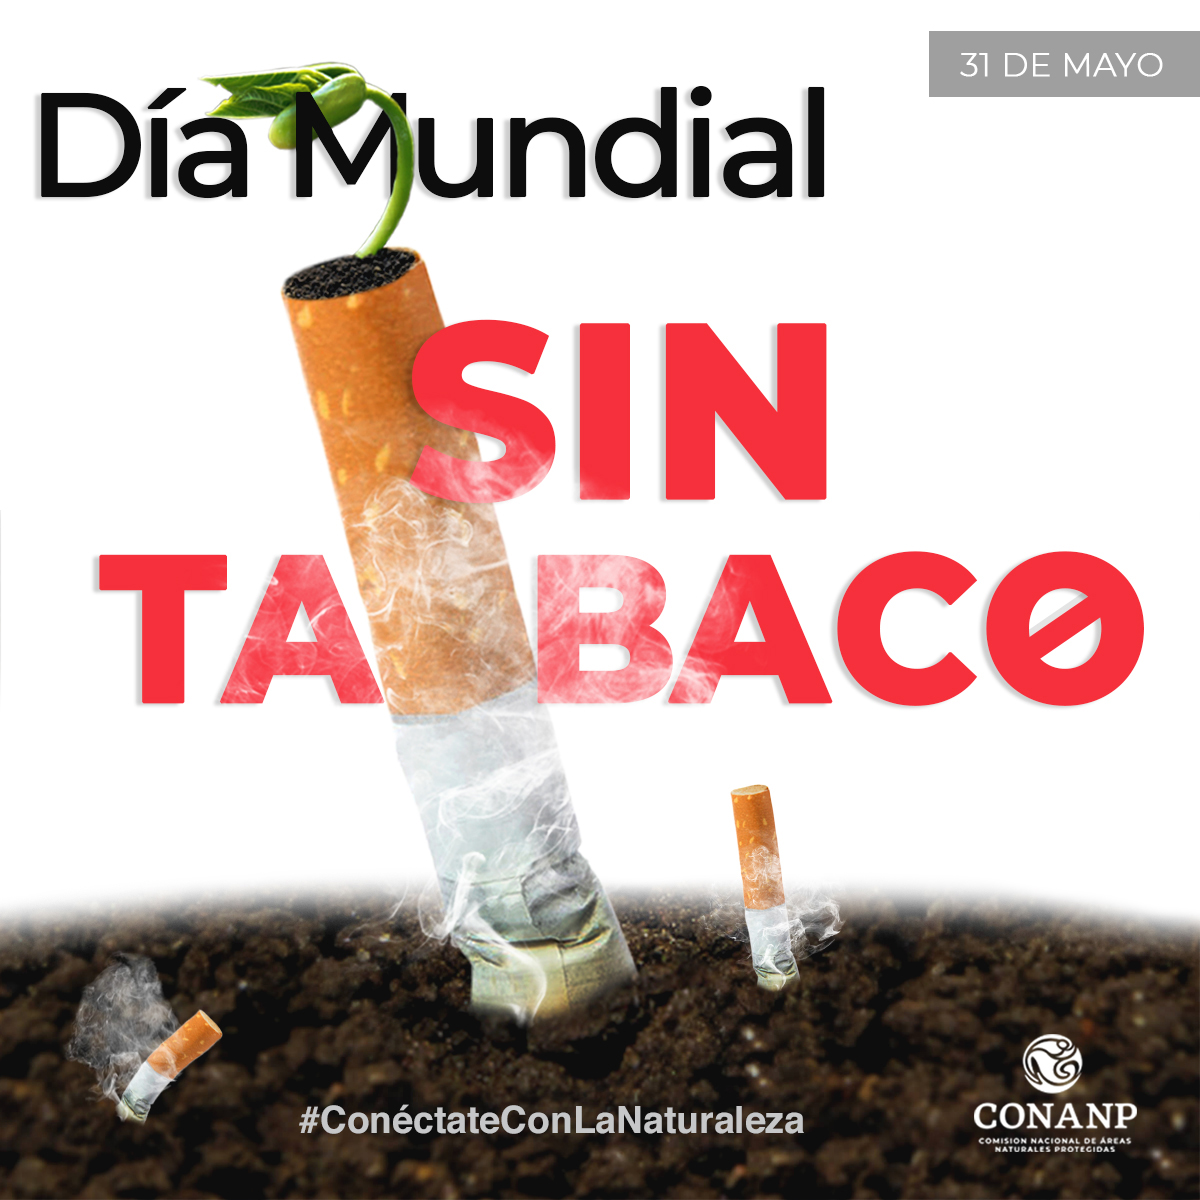 /cms/uploads/image/file/501242/D_a_Mundial_sin_Tabaco_2019.jpg